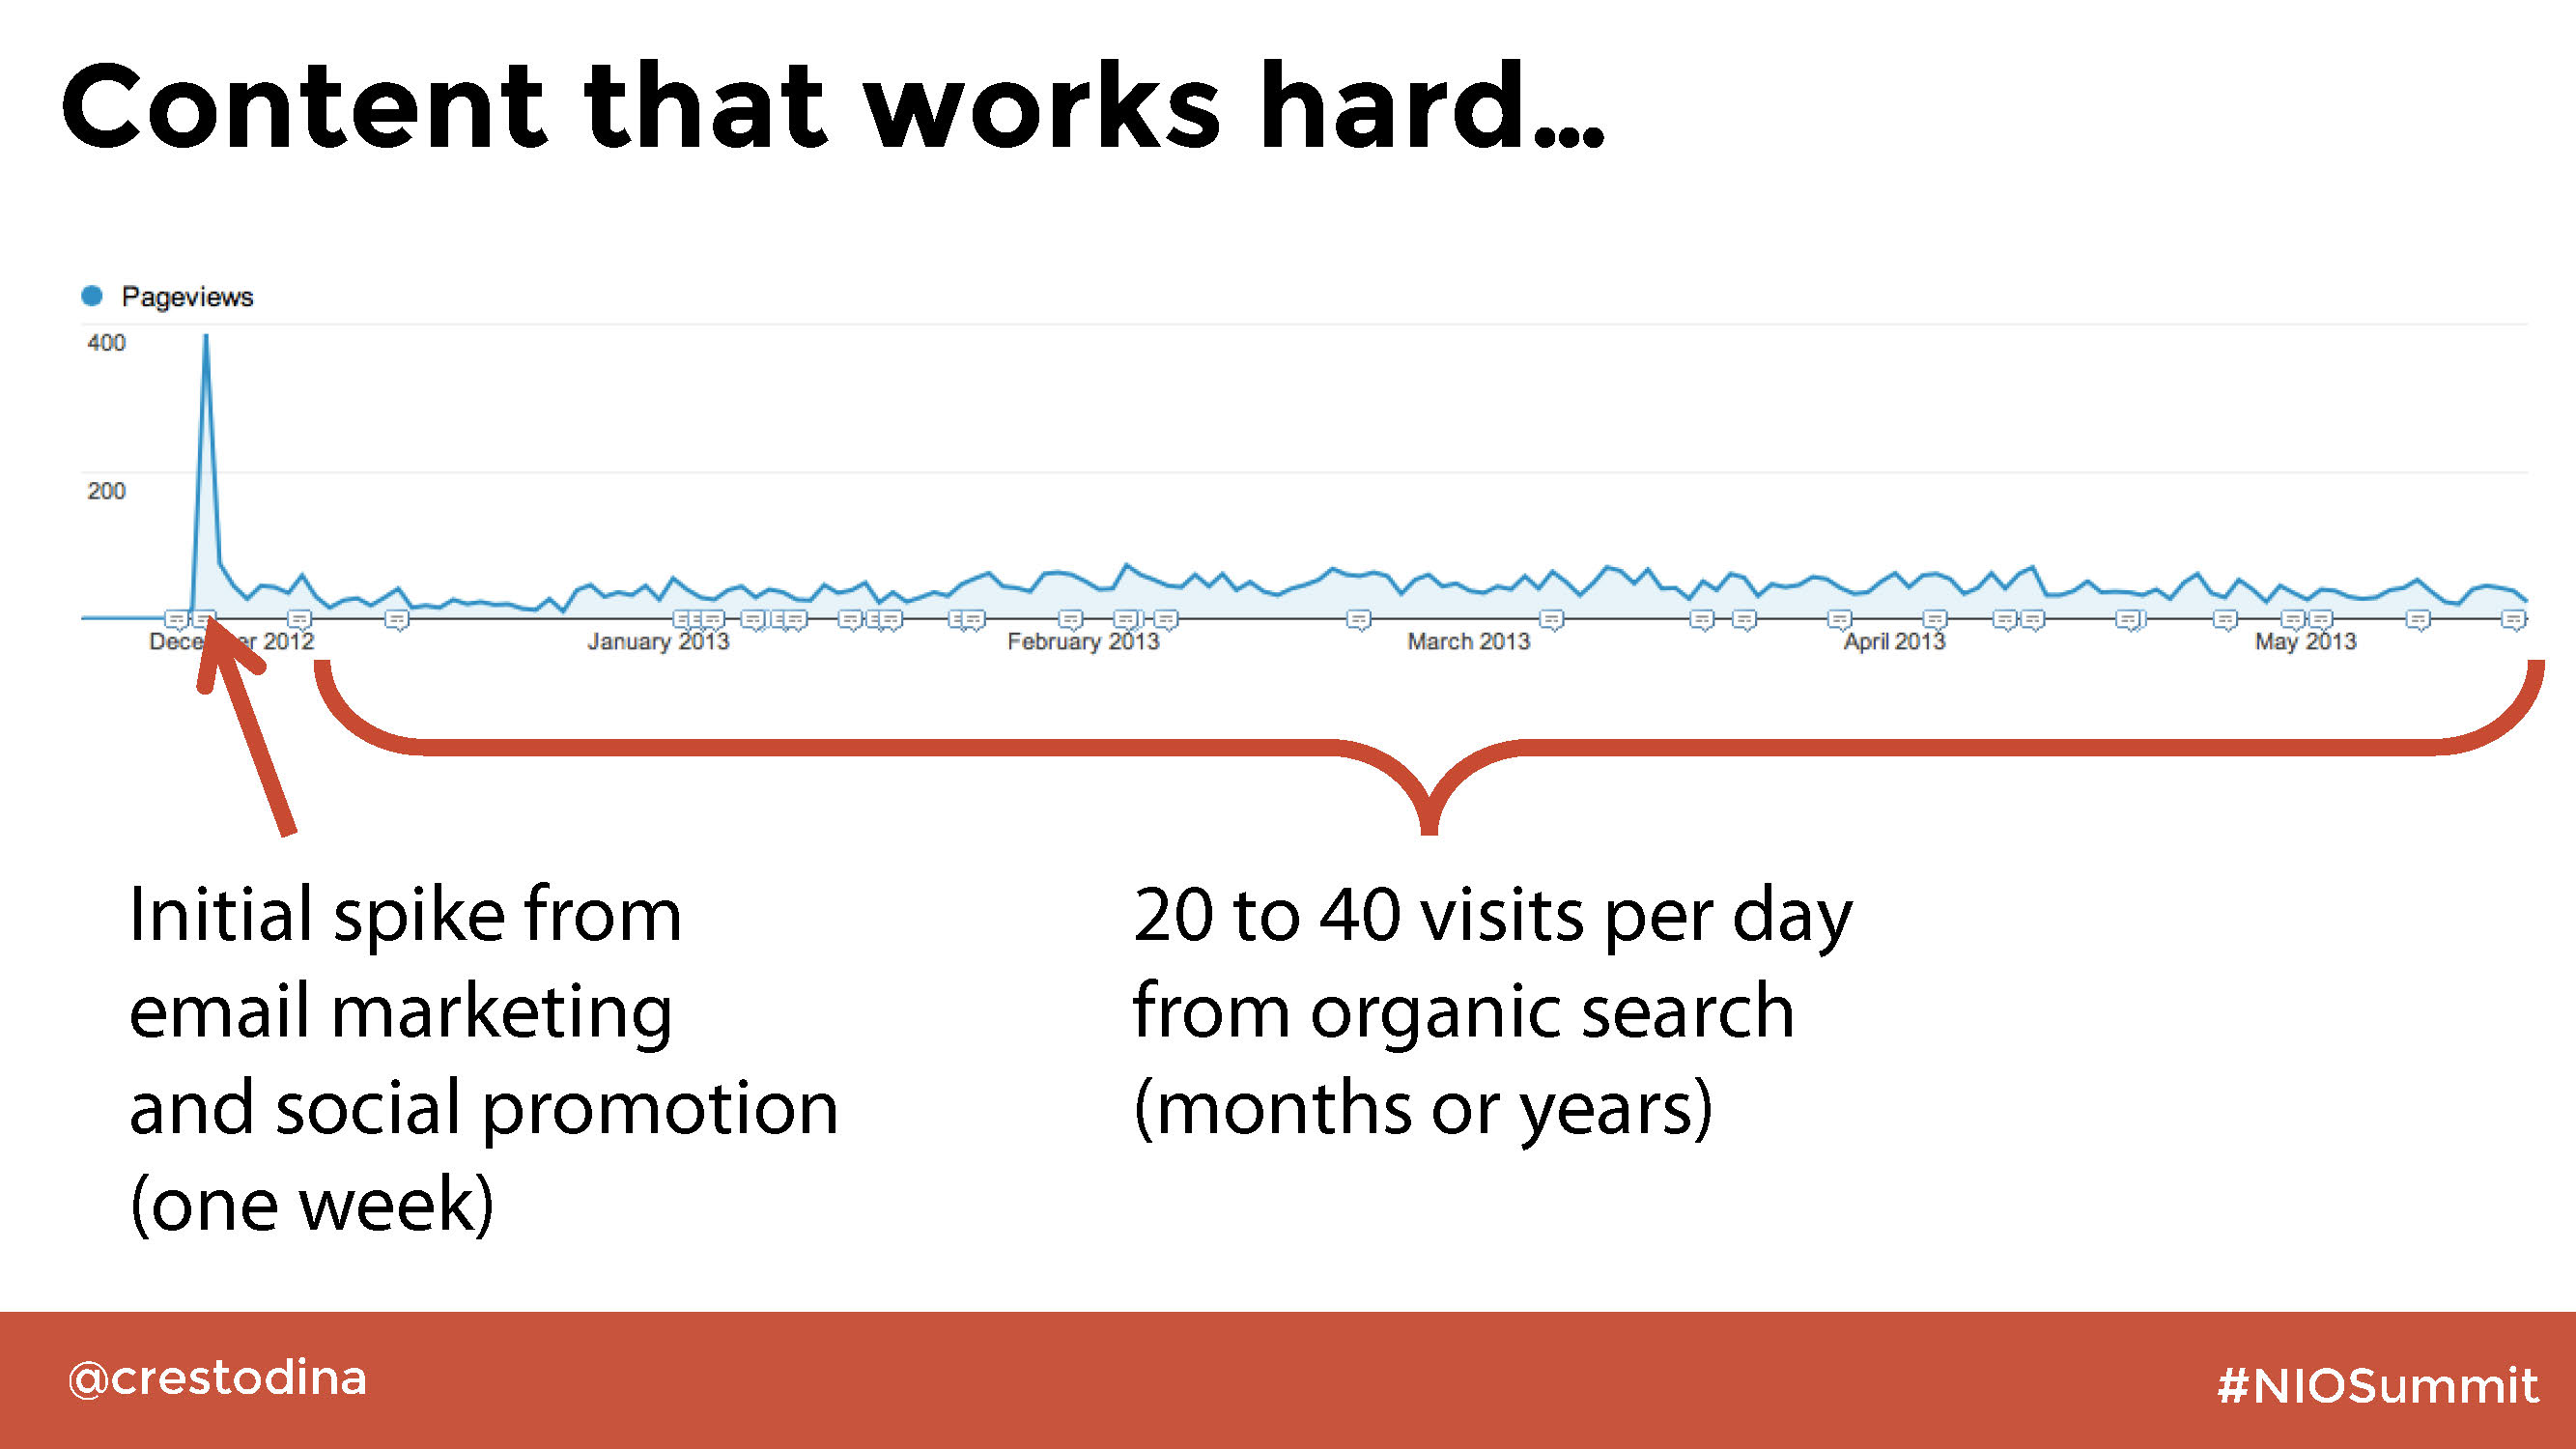 Image showing traffic to a landing page from SEO over time